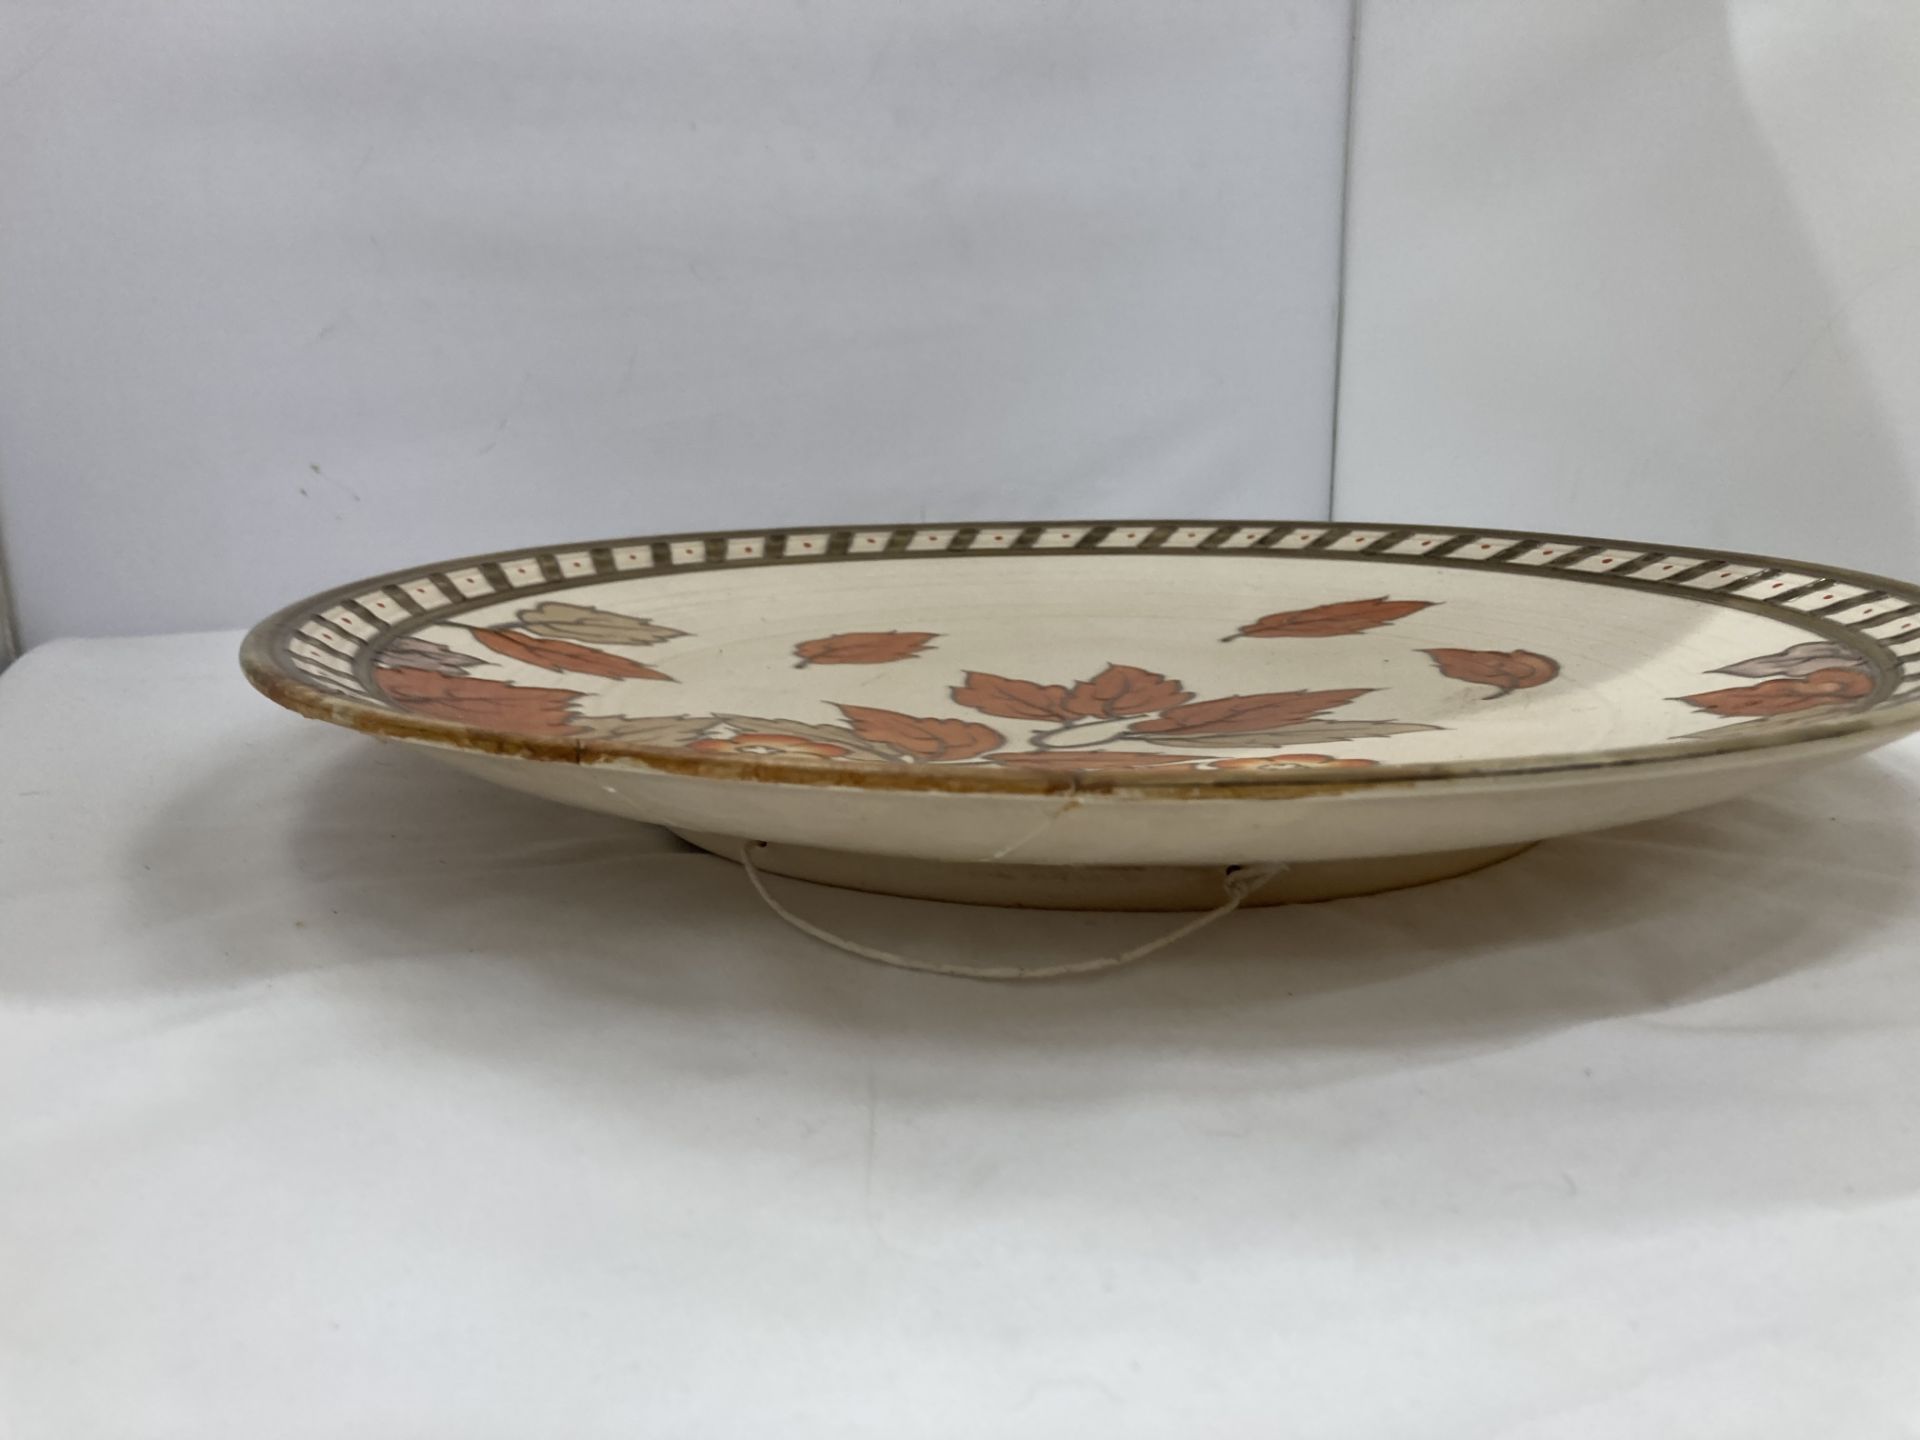 A LARGE CHARLOTTE RHEAD DECORATED CHARGER DIAMETER 43.5CM - Image 9 of 18